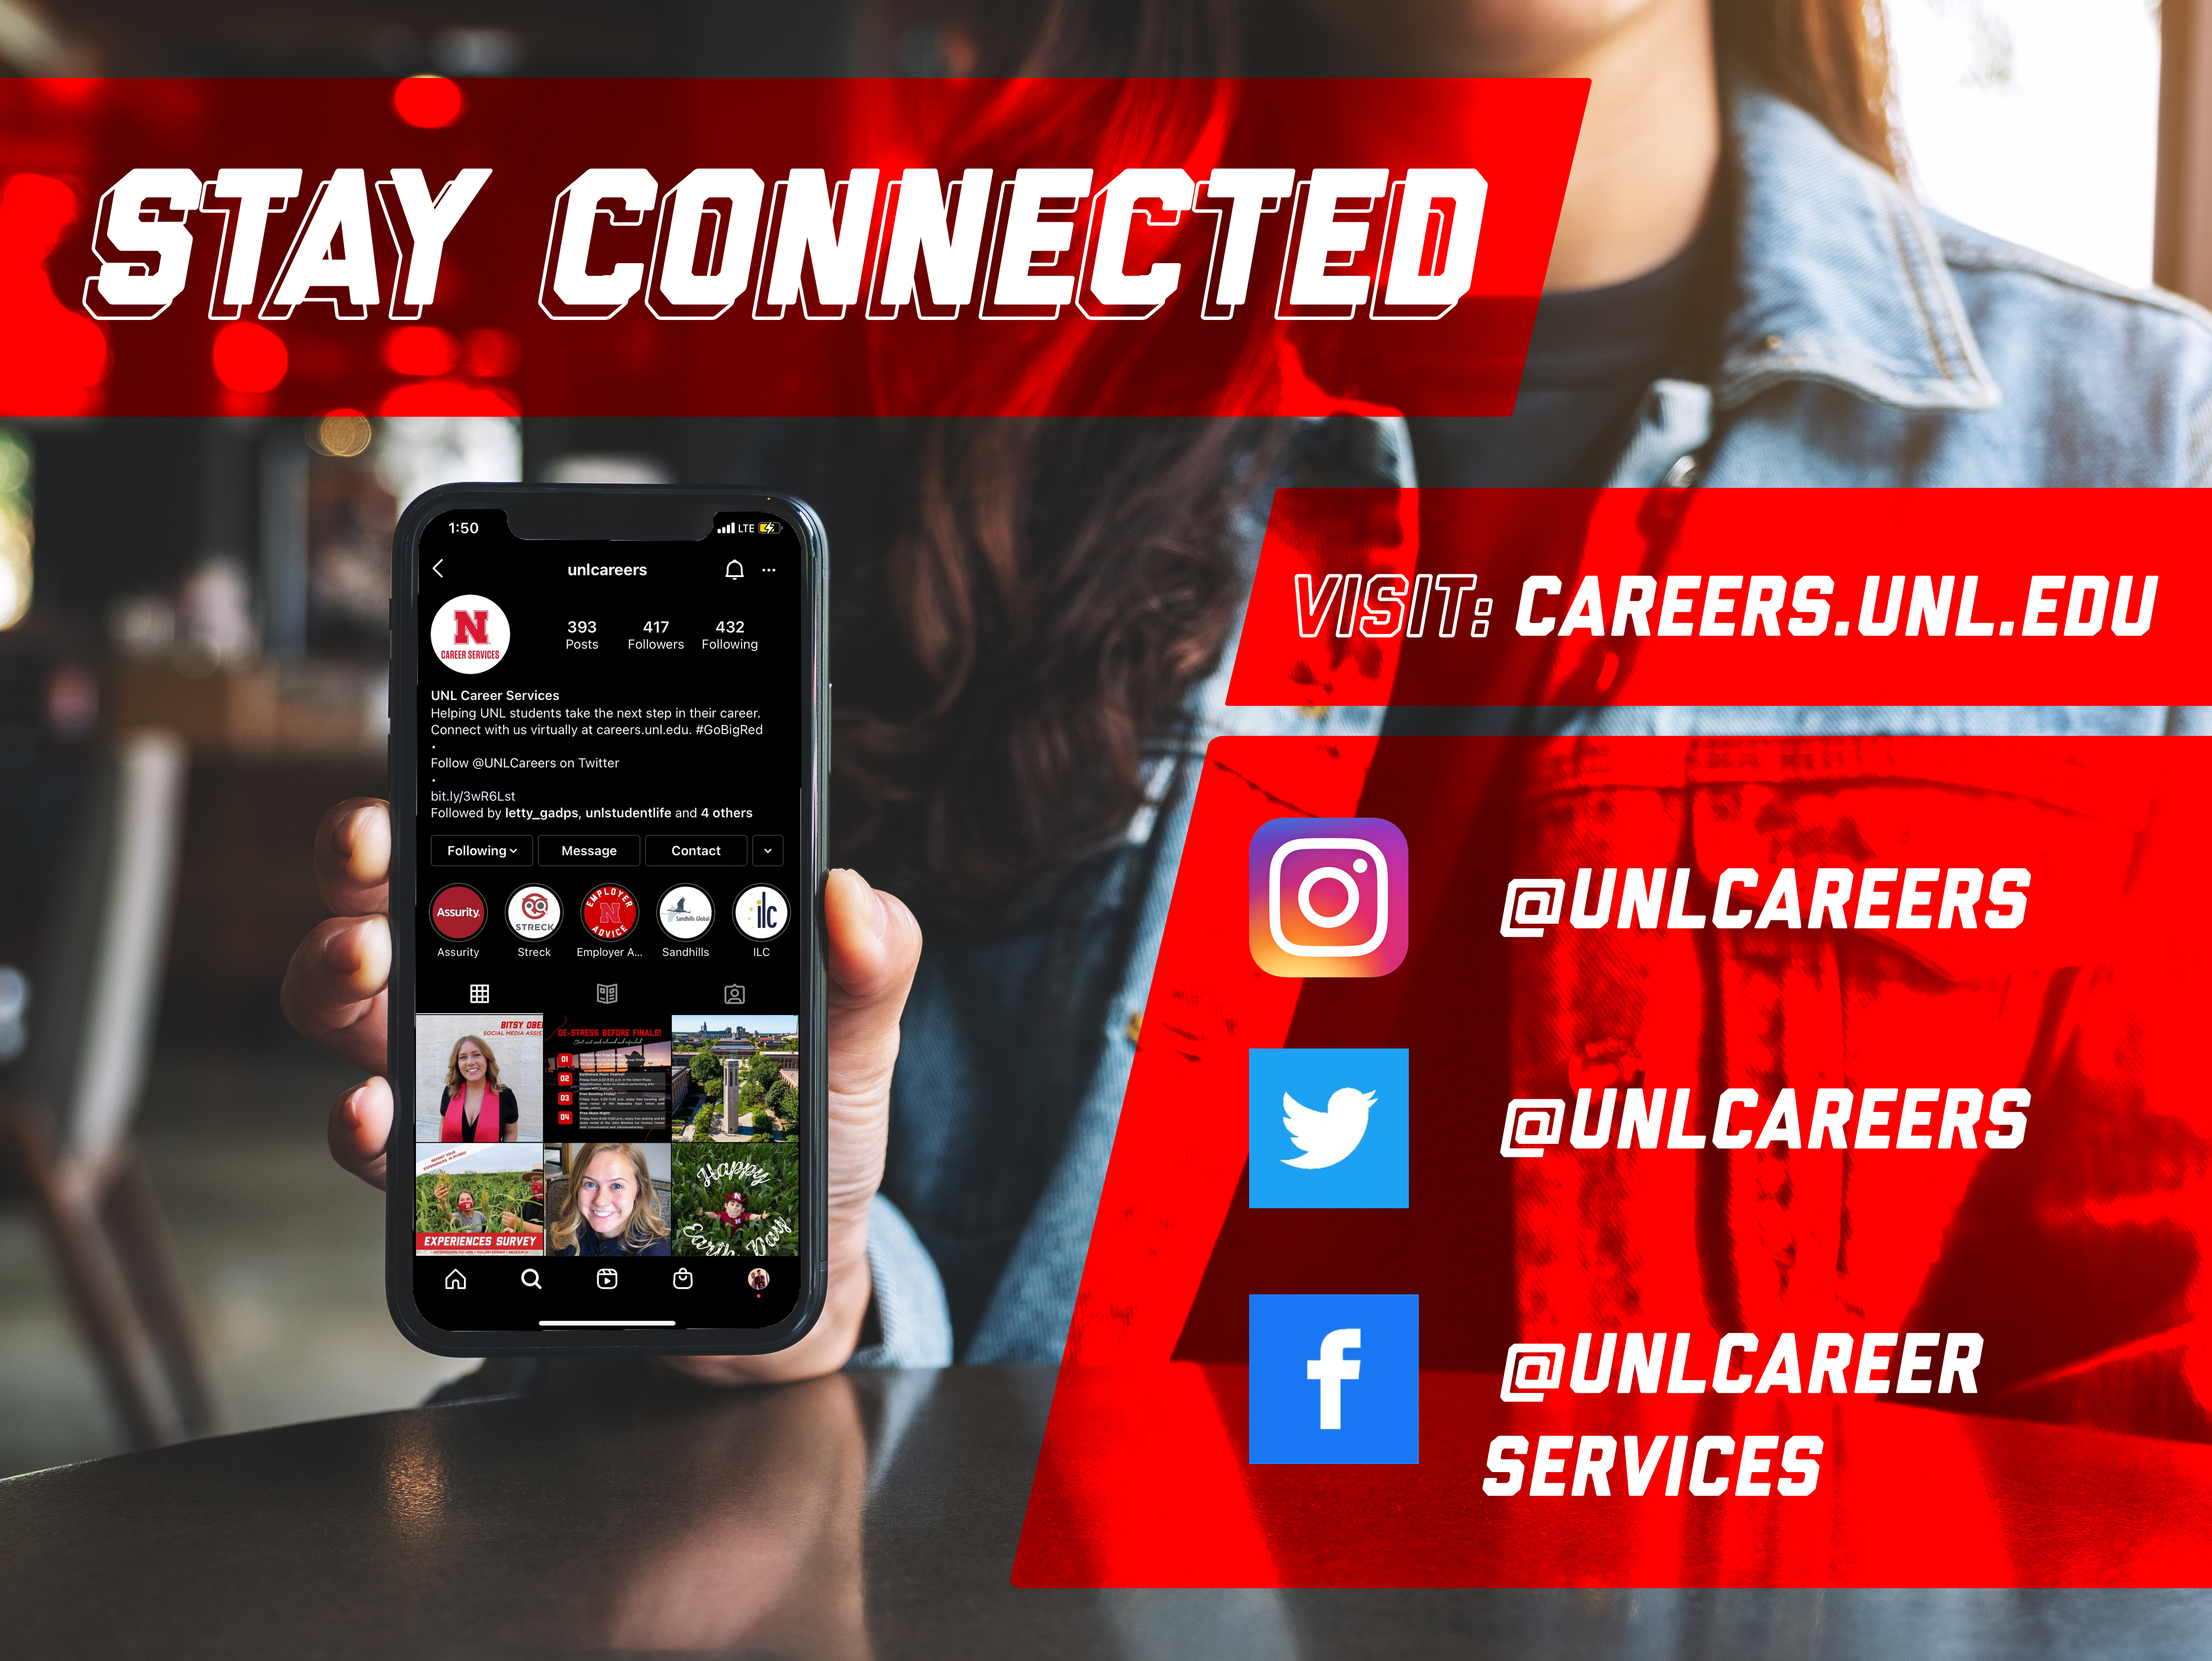 Follow Career Services for events, tips, and some fun.